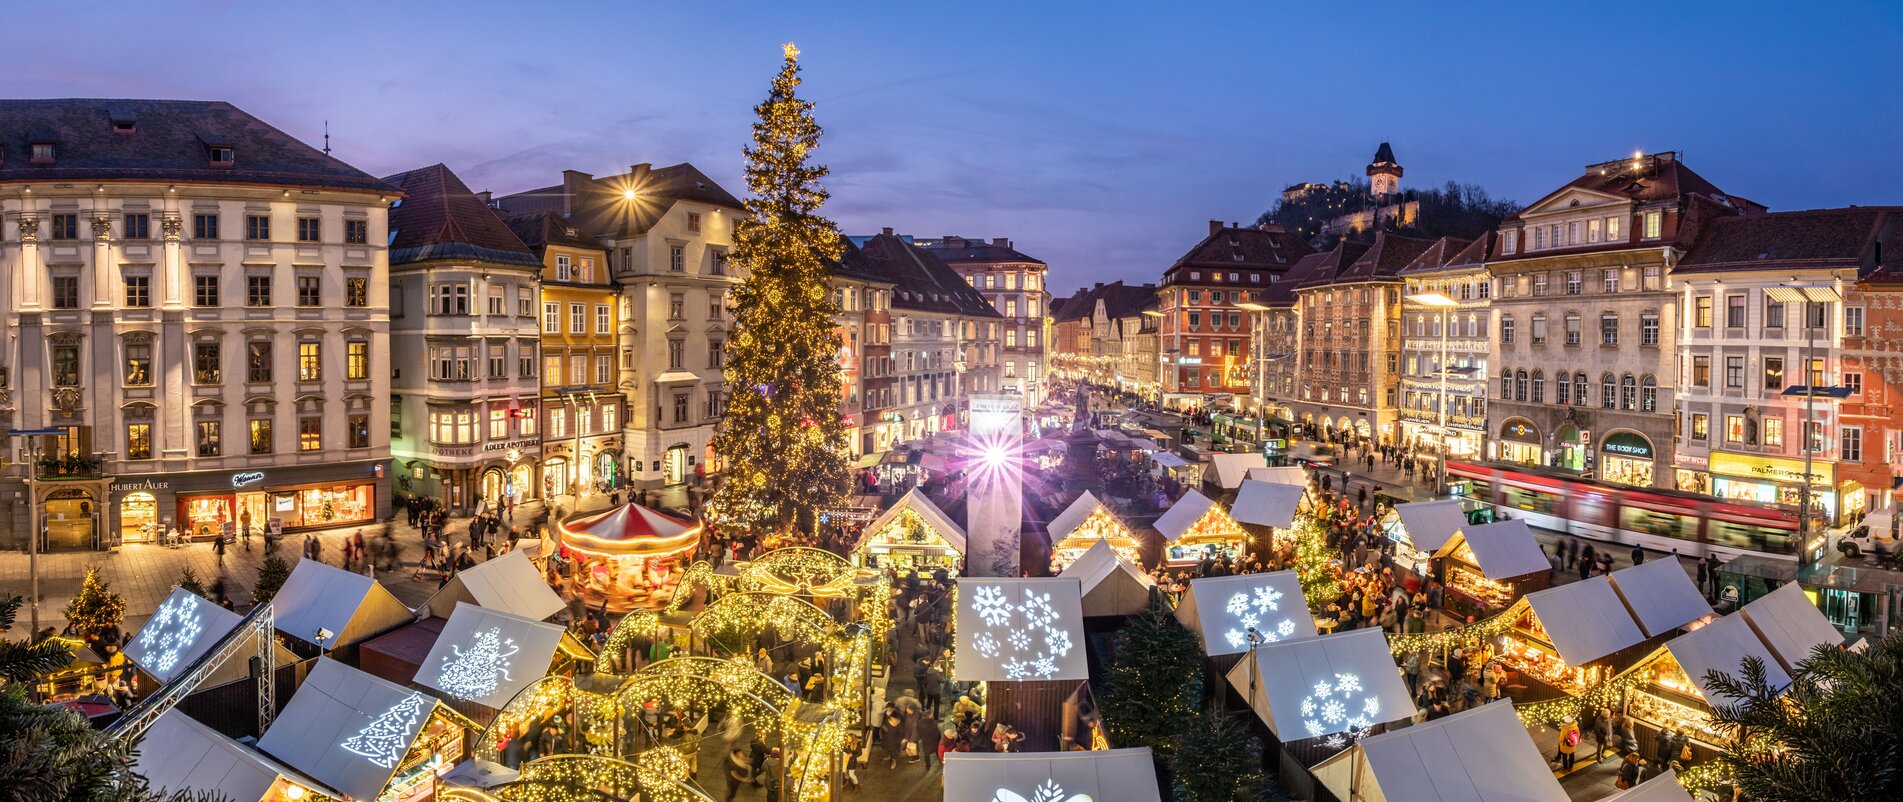 Christmas market on Hauptplatz square in front of the town hall | © Graz Tourismus - Rene Walter 